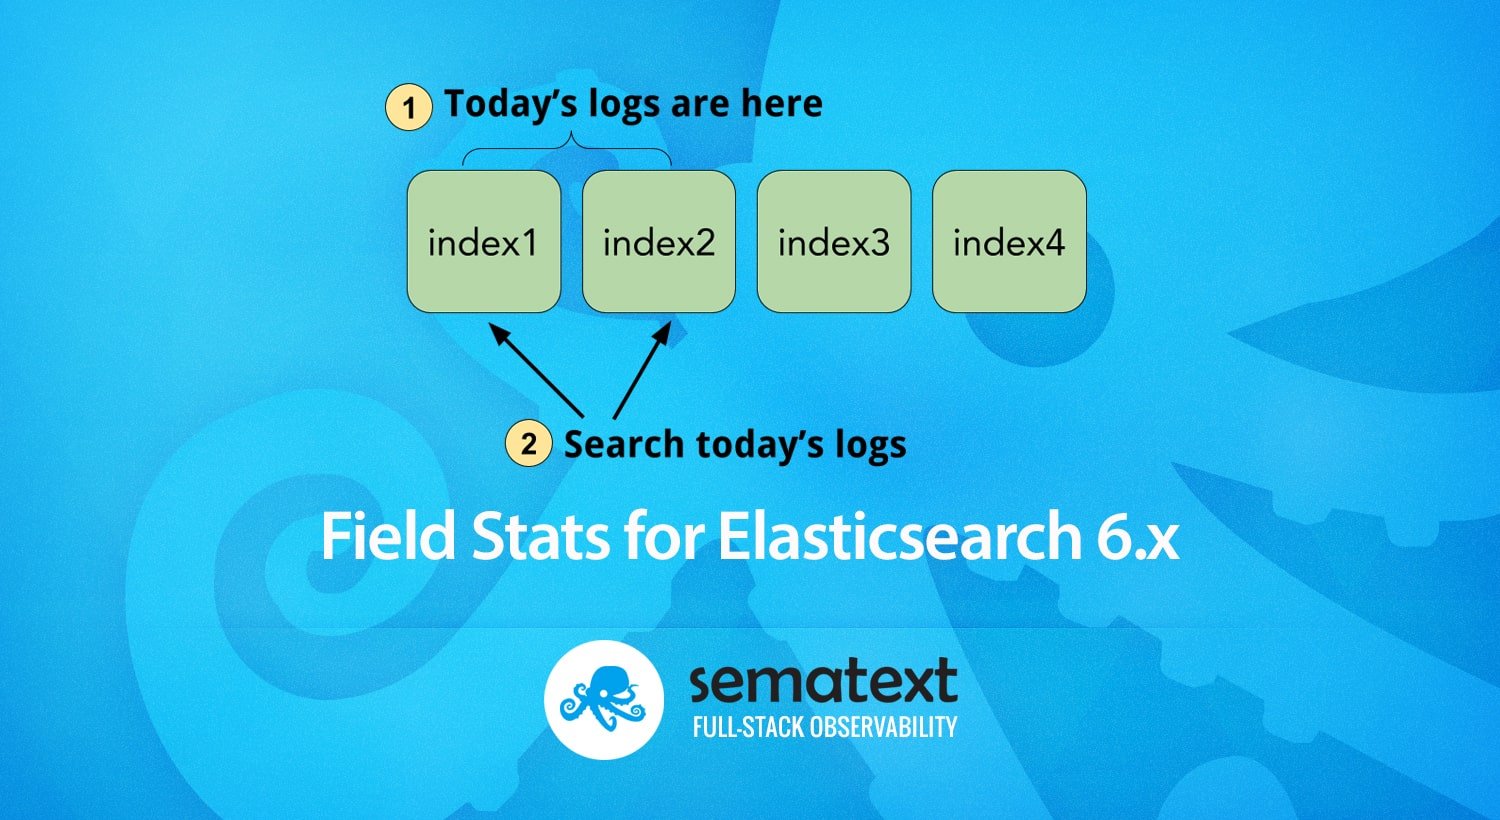 Field Stats for Elasticsearch 6.x